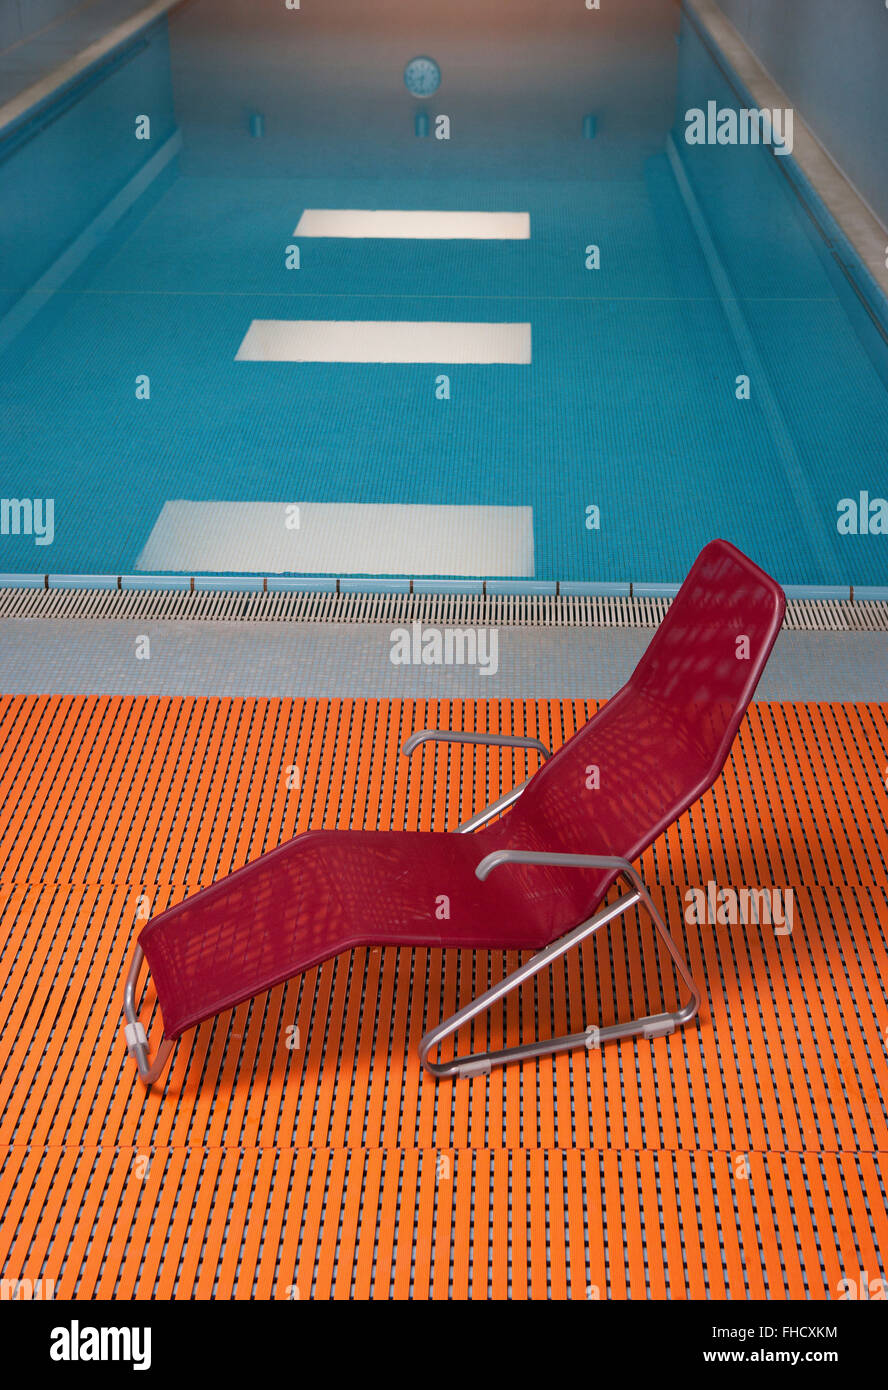 Deckchair at indoor swimming pool Stock Photo